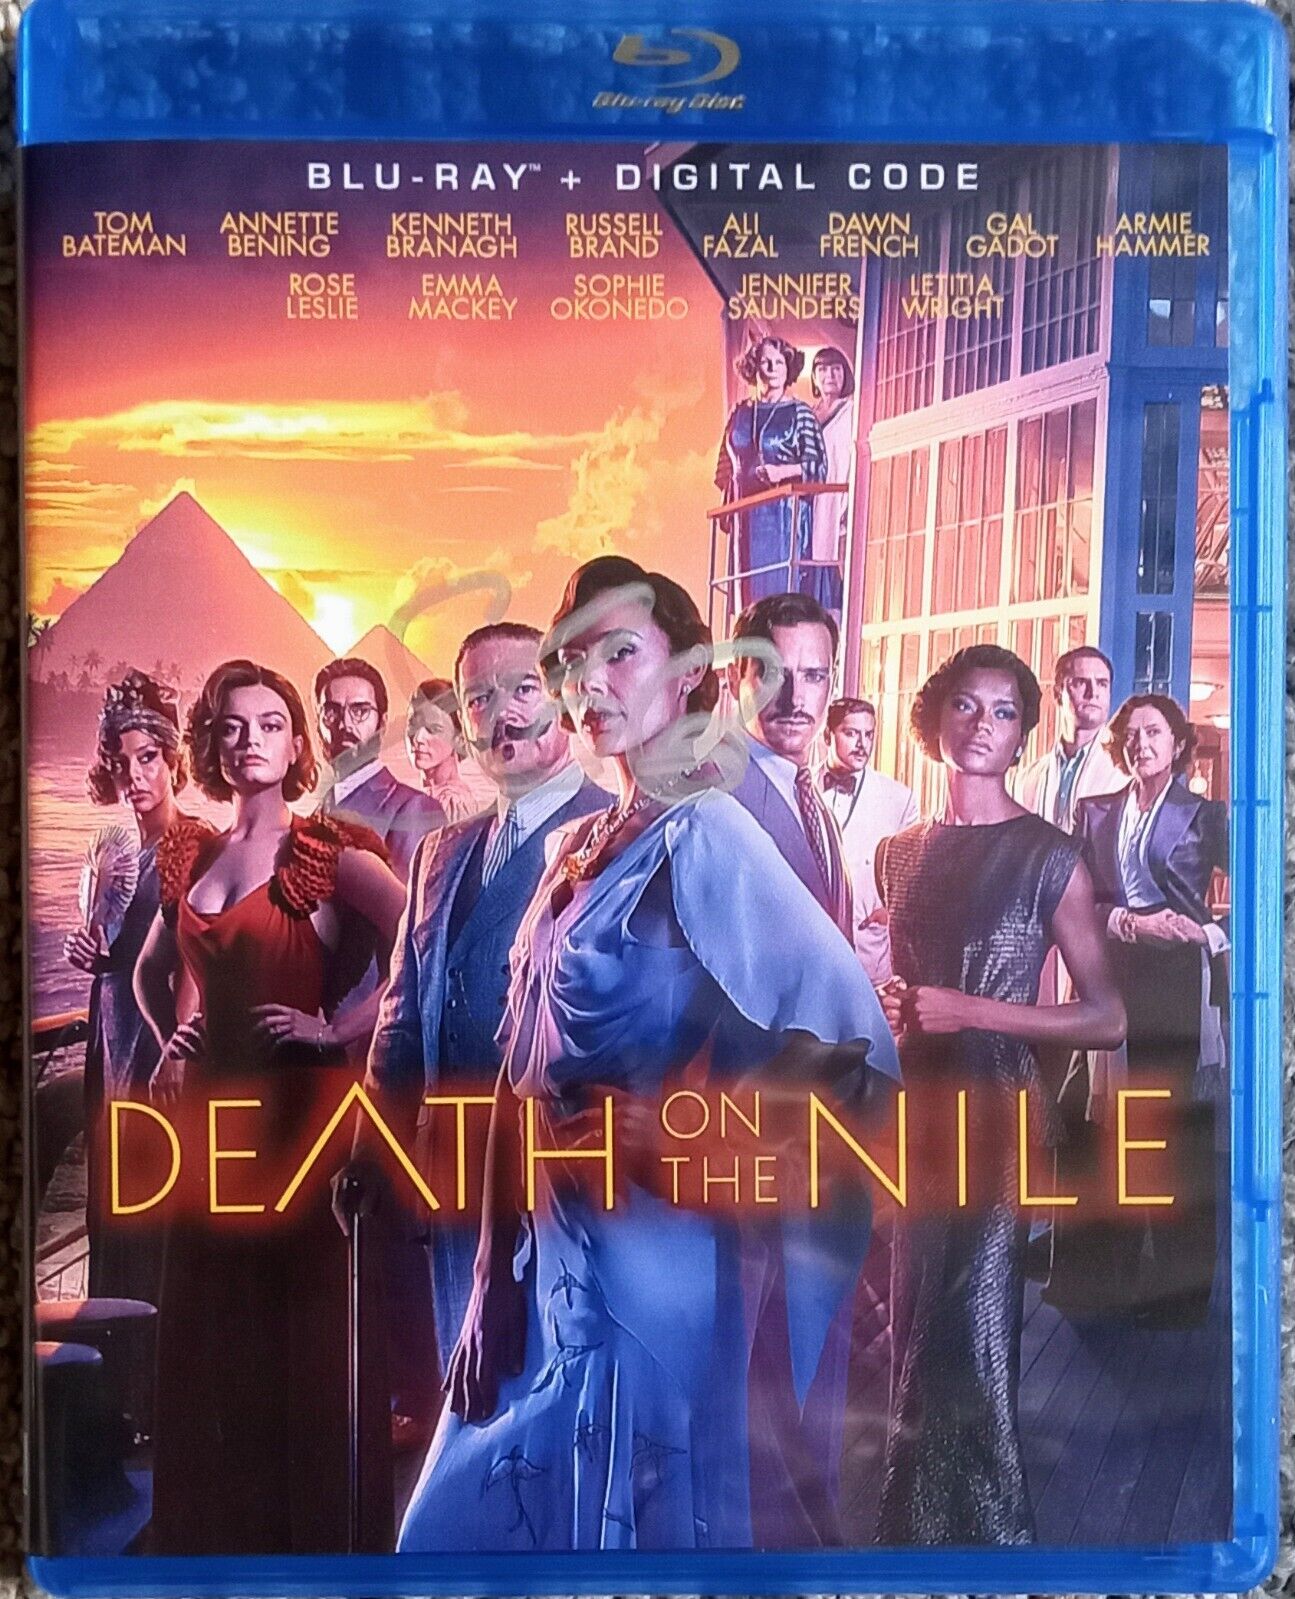 Gal Gadot Autographed Signed Death On The Nile Blu Ray